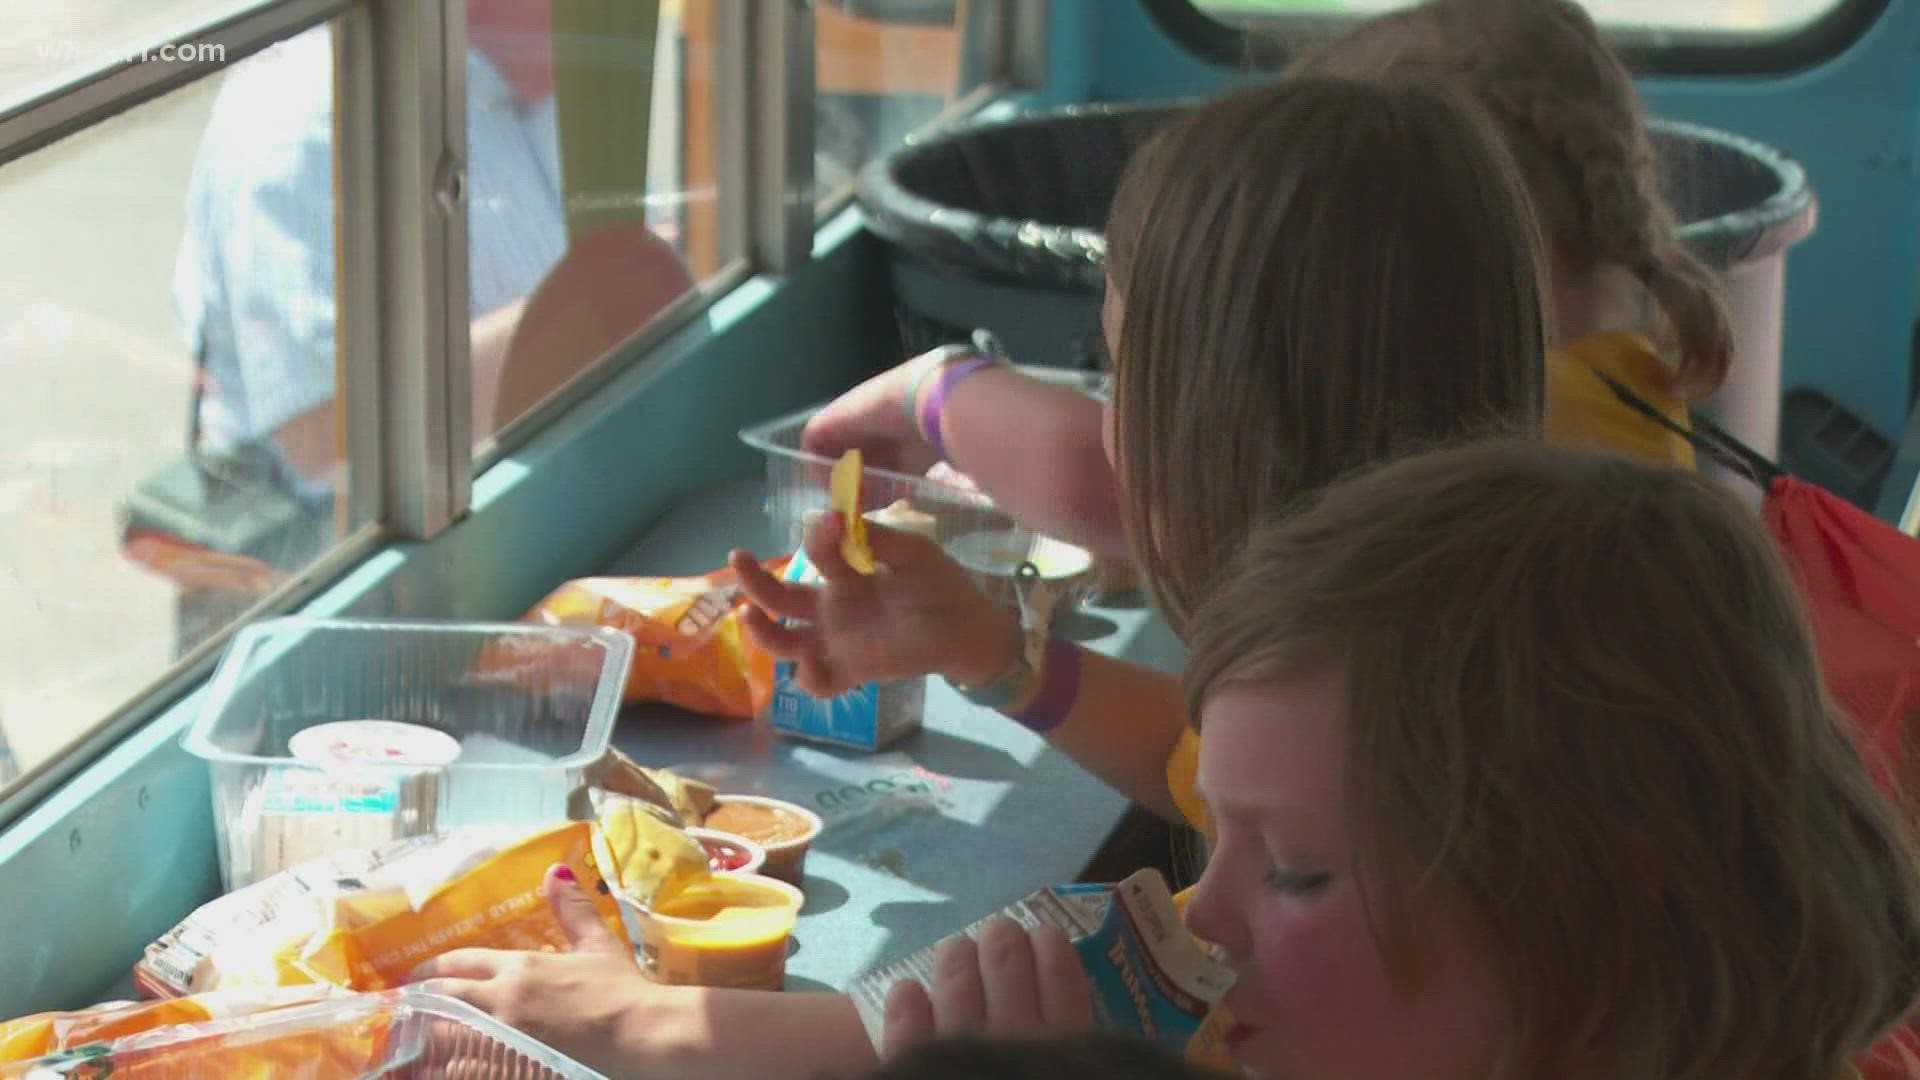 JCPS provides summer meals to students